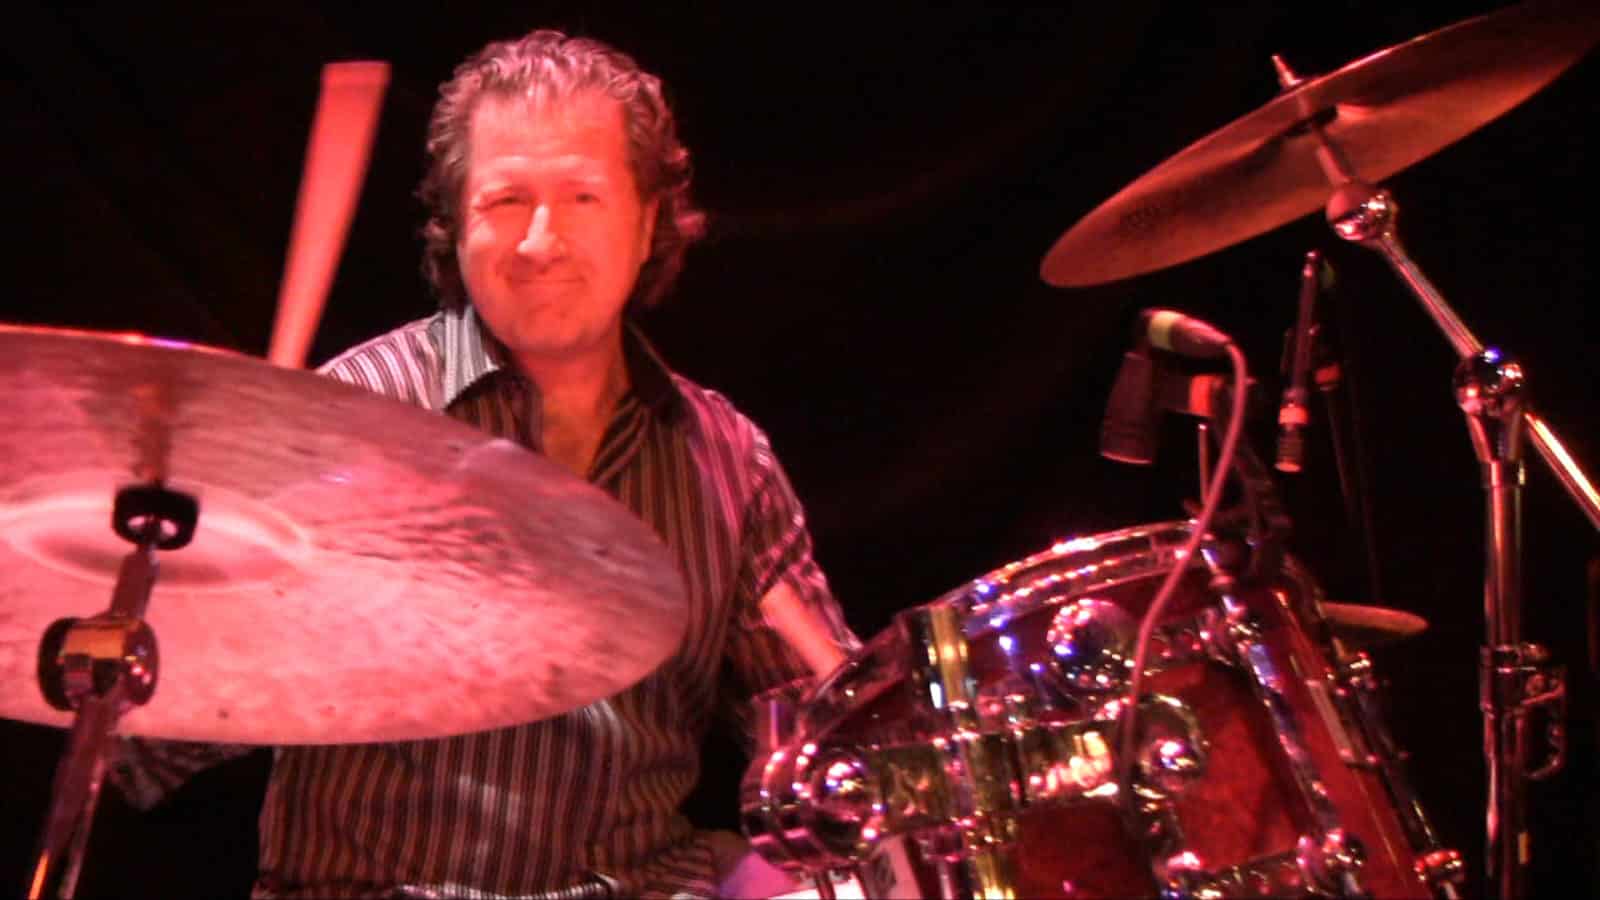 Ron Wikso on Drums